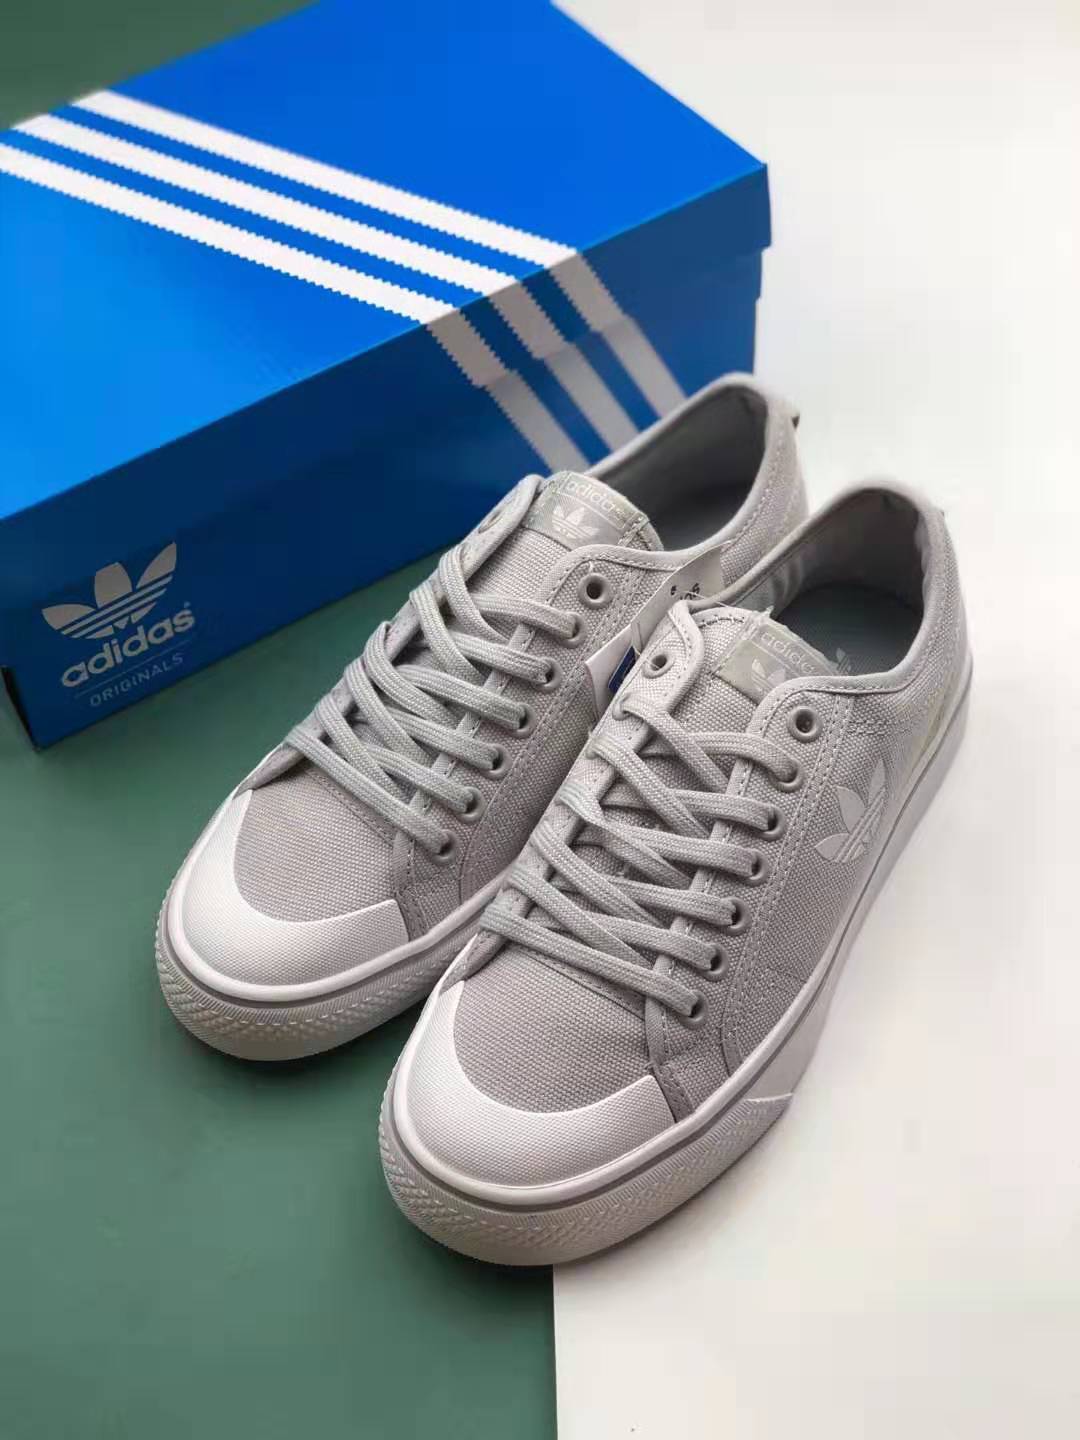 Adidas Womens Original Nizza Grey Two Cloud White Crystal White EF2039 - Stylish and Versatile Sneakers for Women